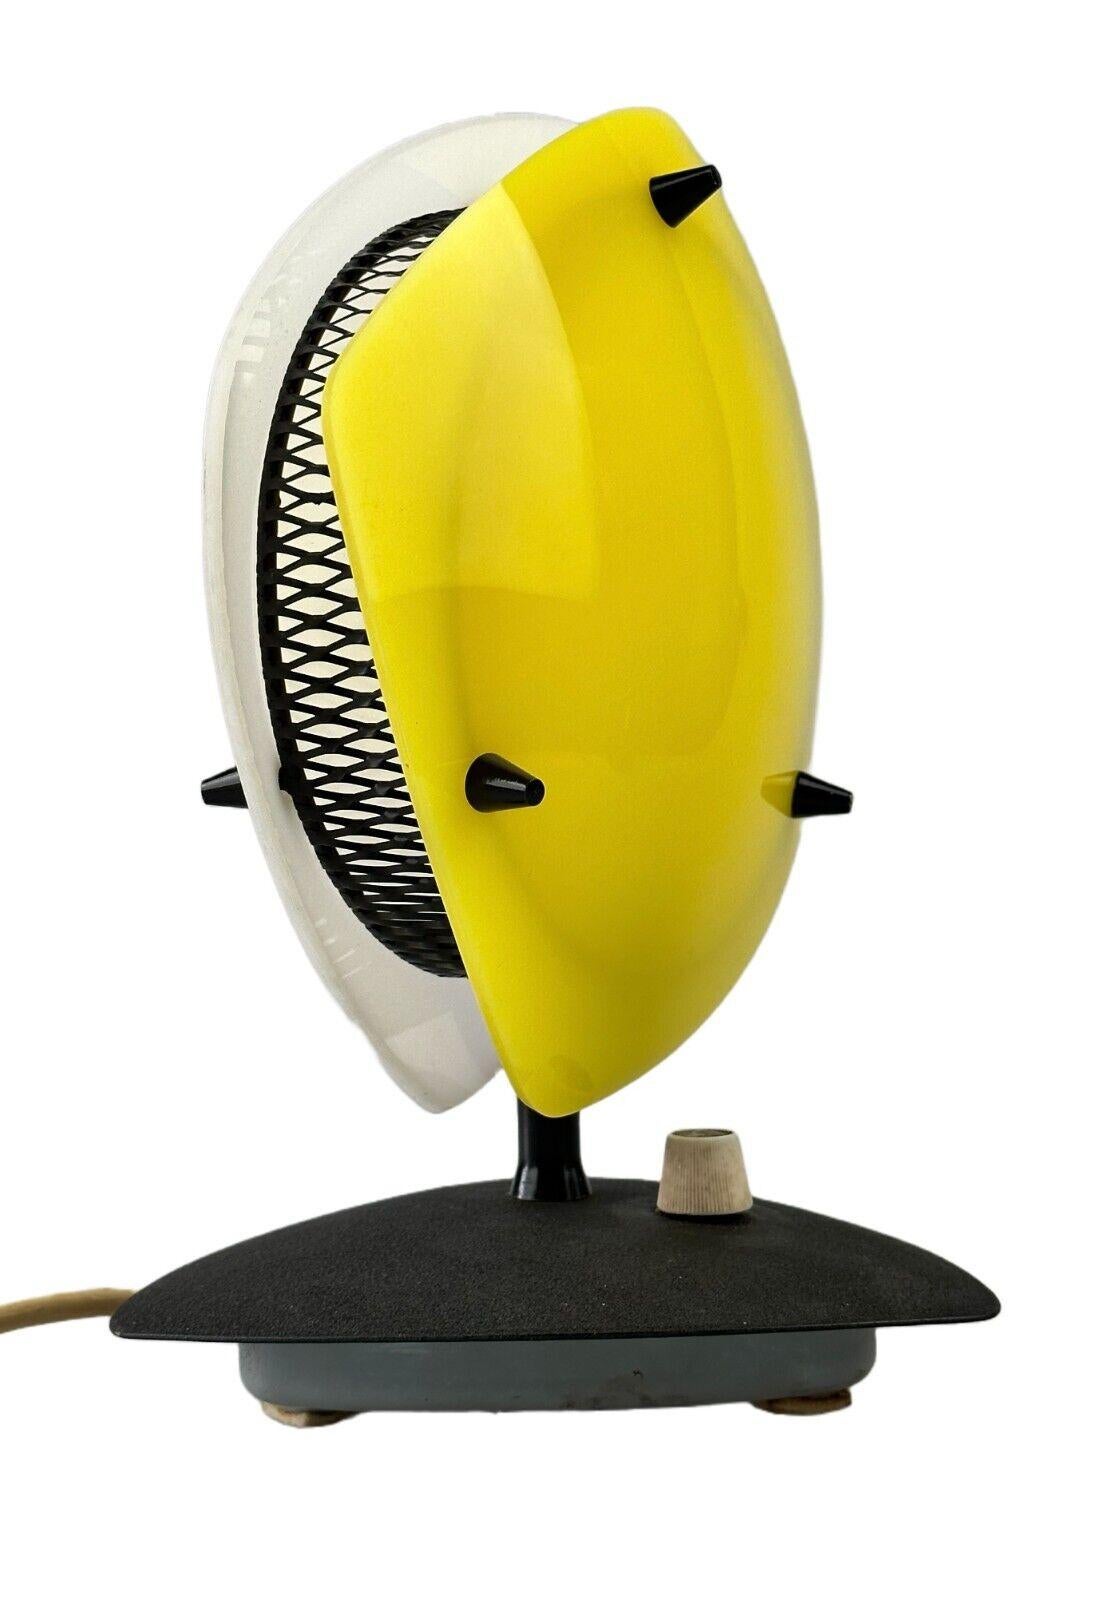 60s 70s table lamp plastic metal Sonnenkind Tele Ambiance France

Object: table lamp

Manufacturer: Tele Ambiance

Condition: good - vintage

Age: around 1960-1970

Dimensions:

Width = 20cm
Depth = 16cm
Height = 25cm

Other notes:

E14 socket

The